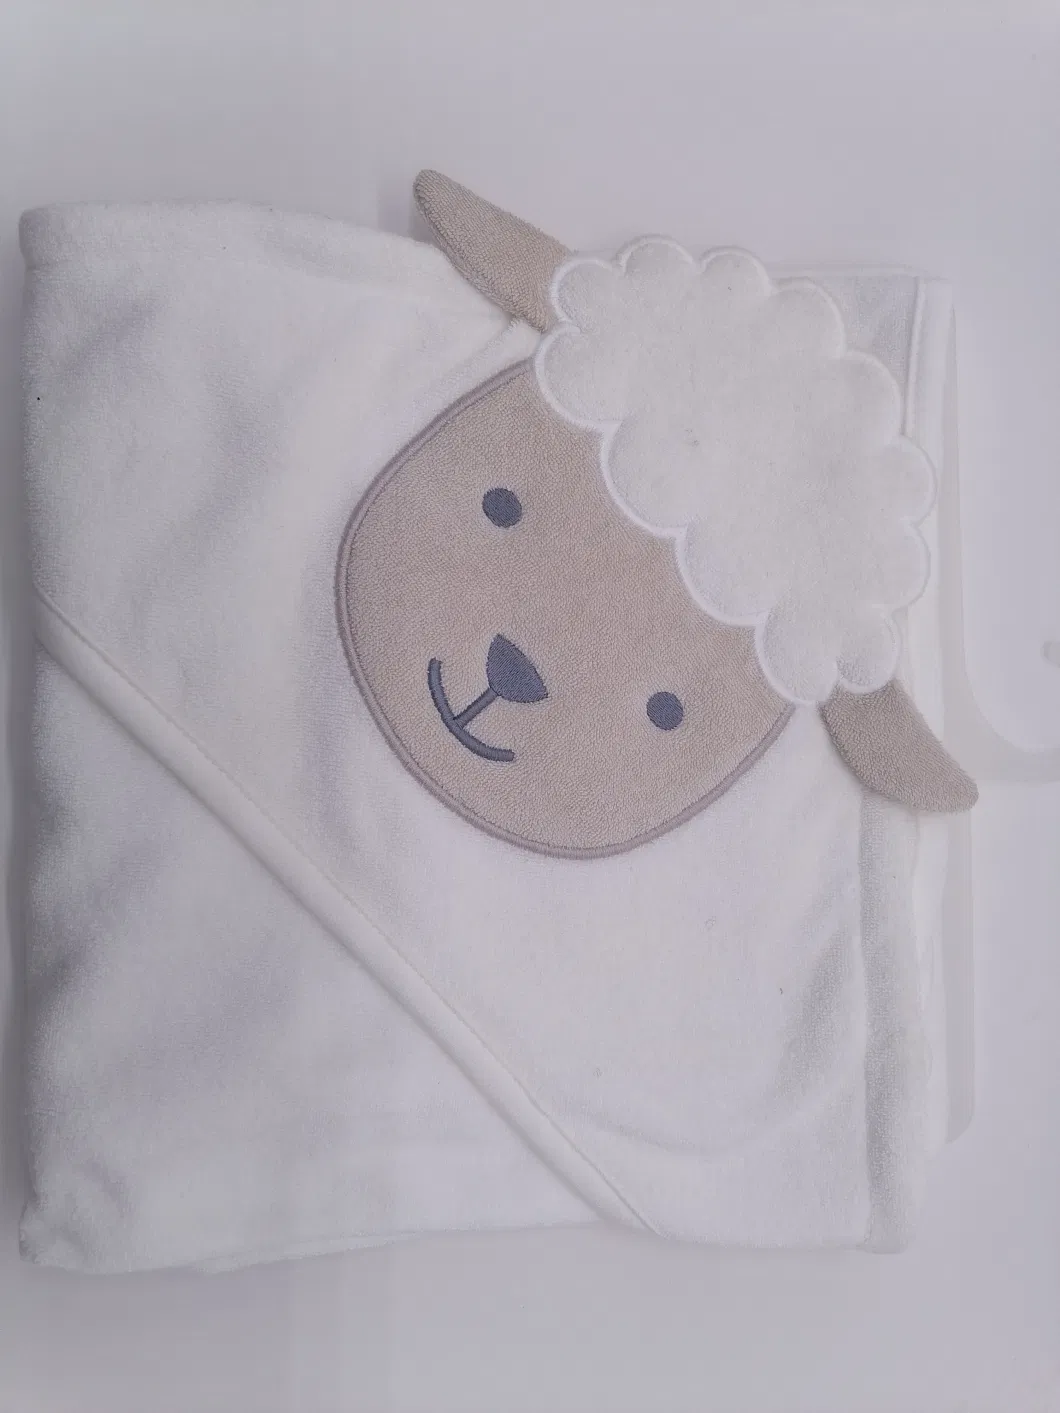 Knit Terry Fabric Ultra-Soft 100% Bamboo 70% Bamboo 30% Cotton Baby Hooded Towel Bath Towel